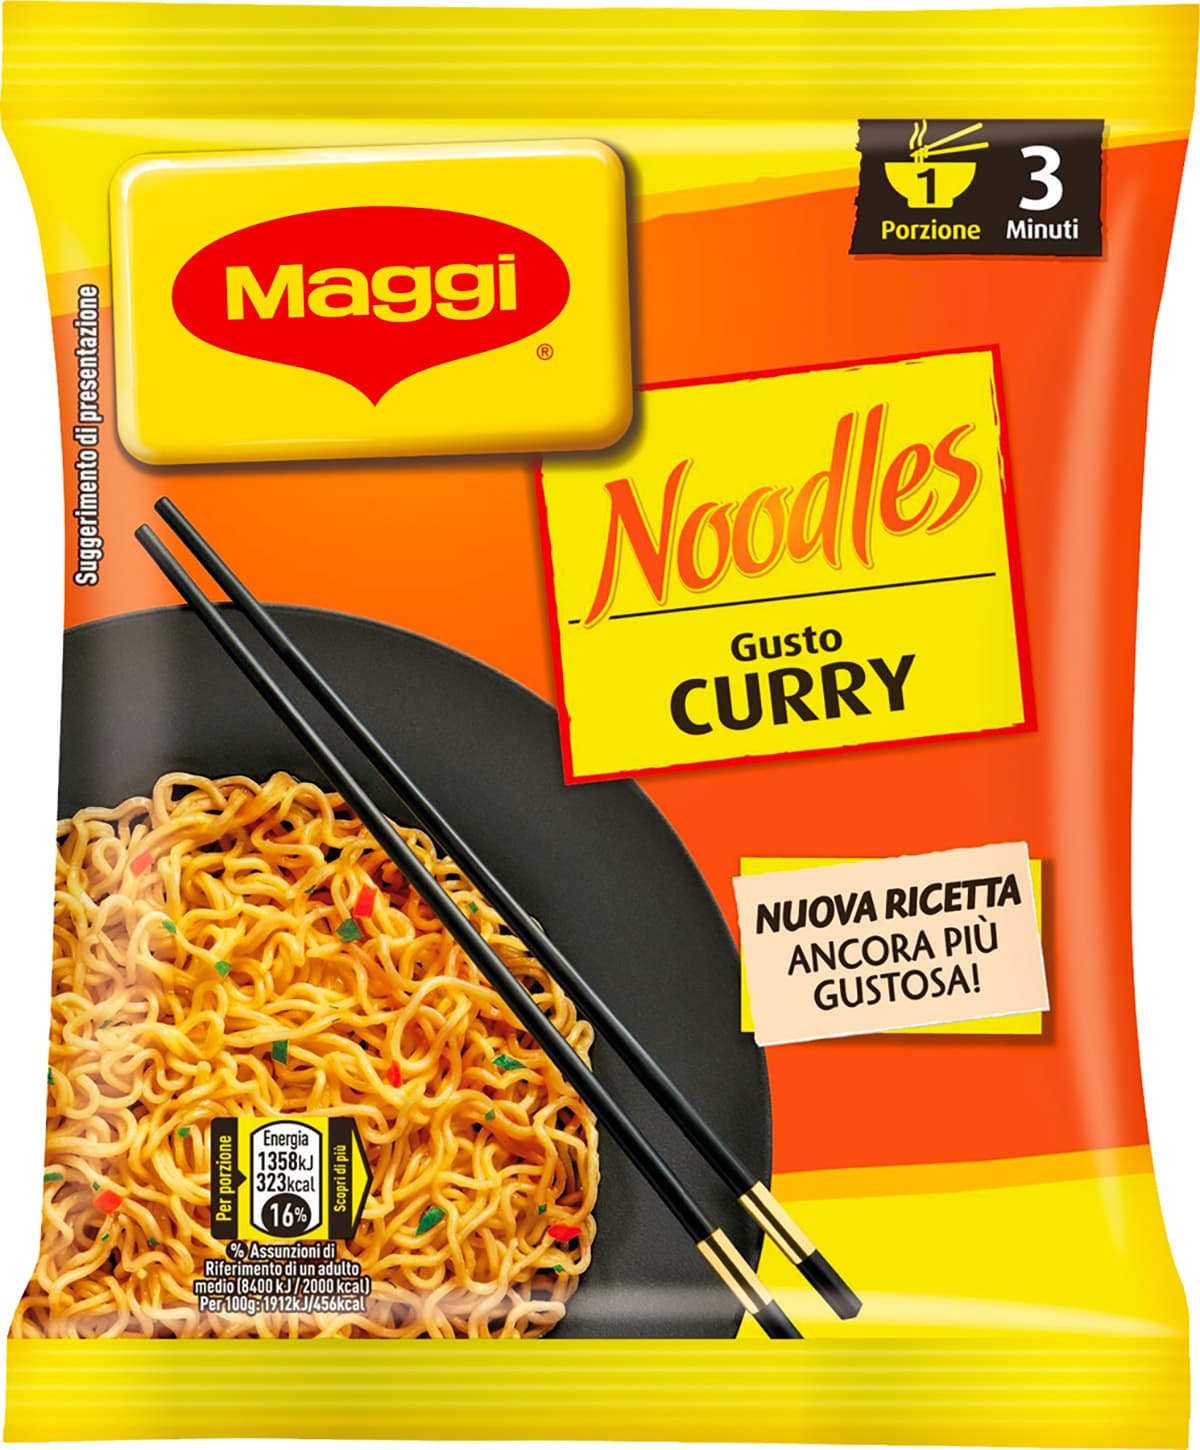 MAGGI Noodles Curry